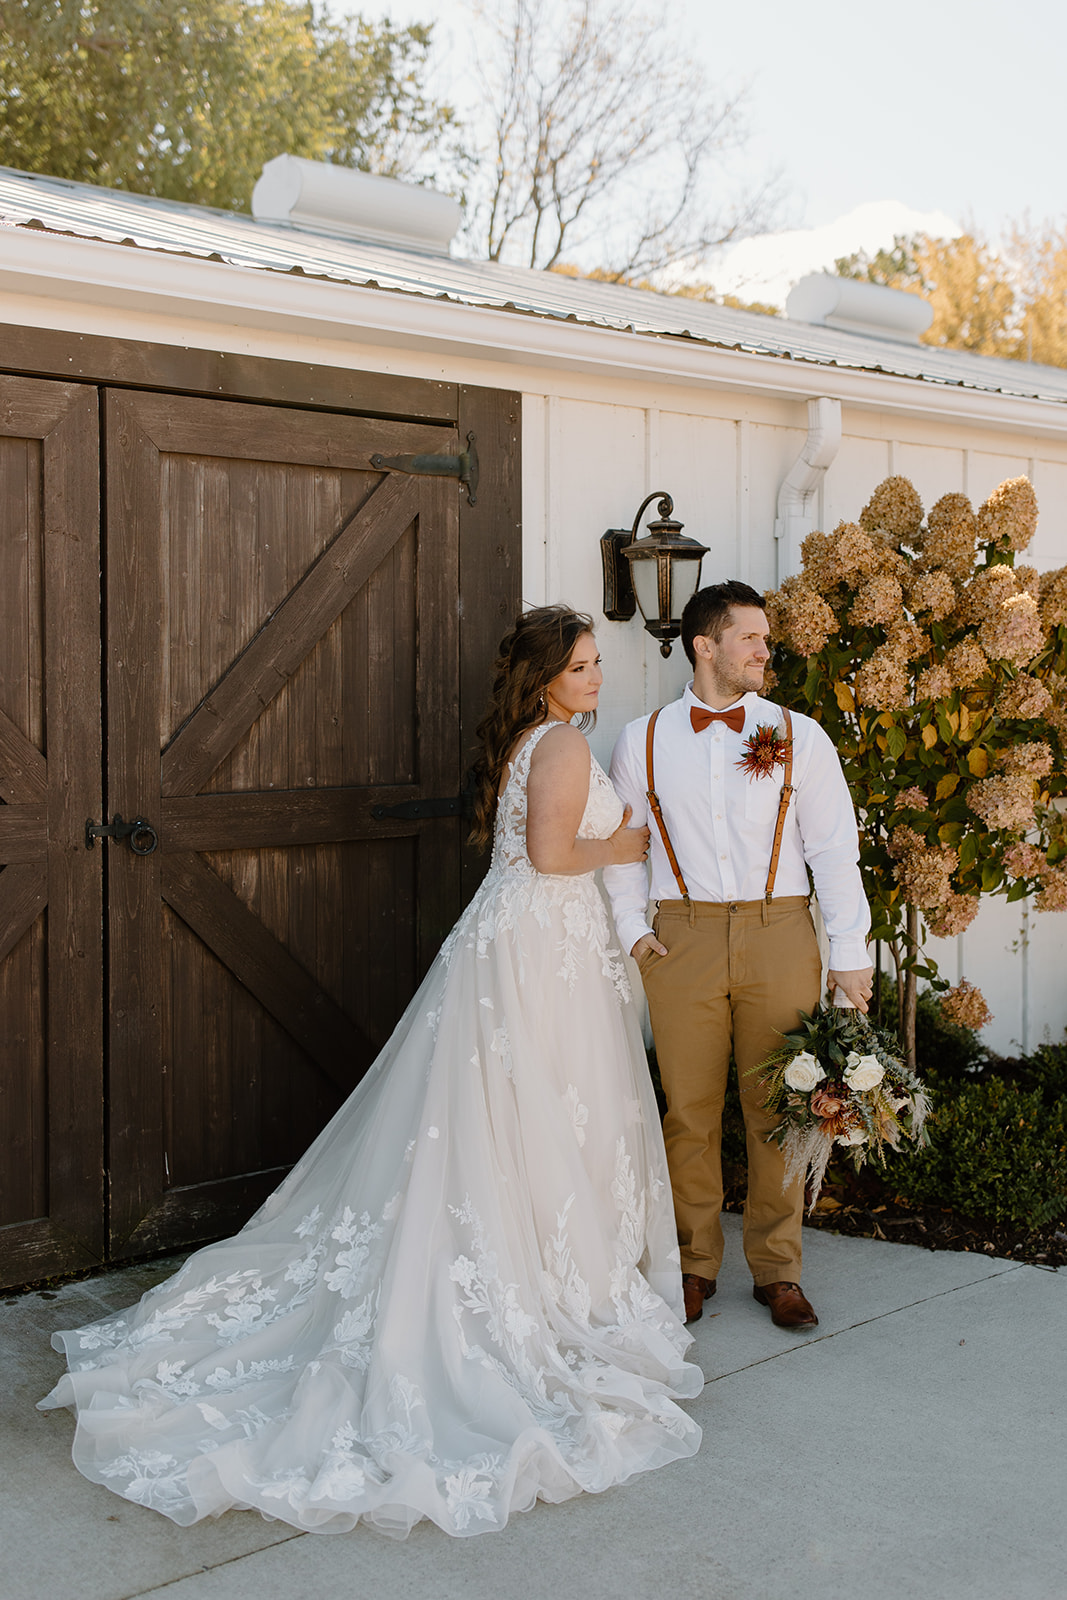 Bride and groom look away from the camera in front of a barn door